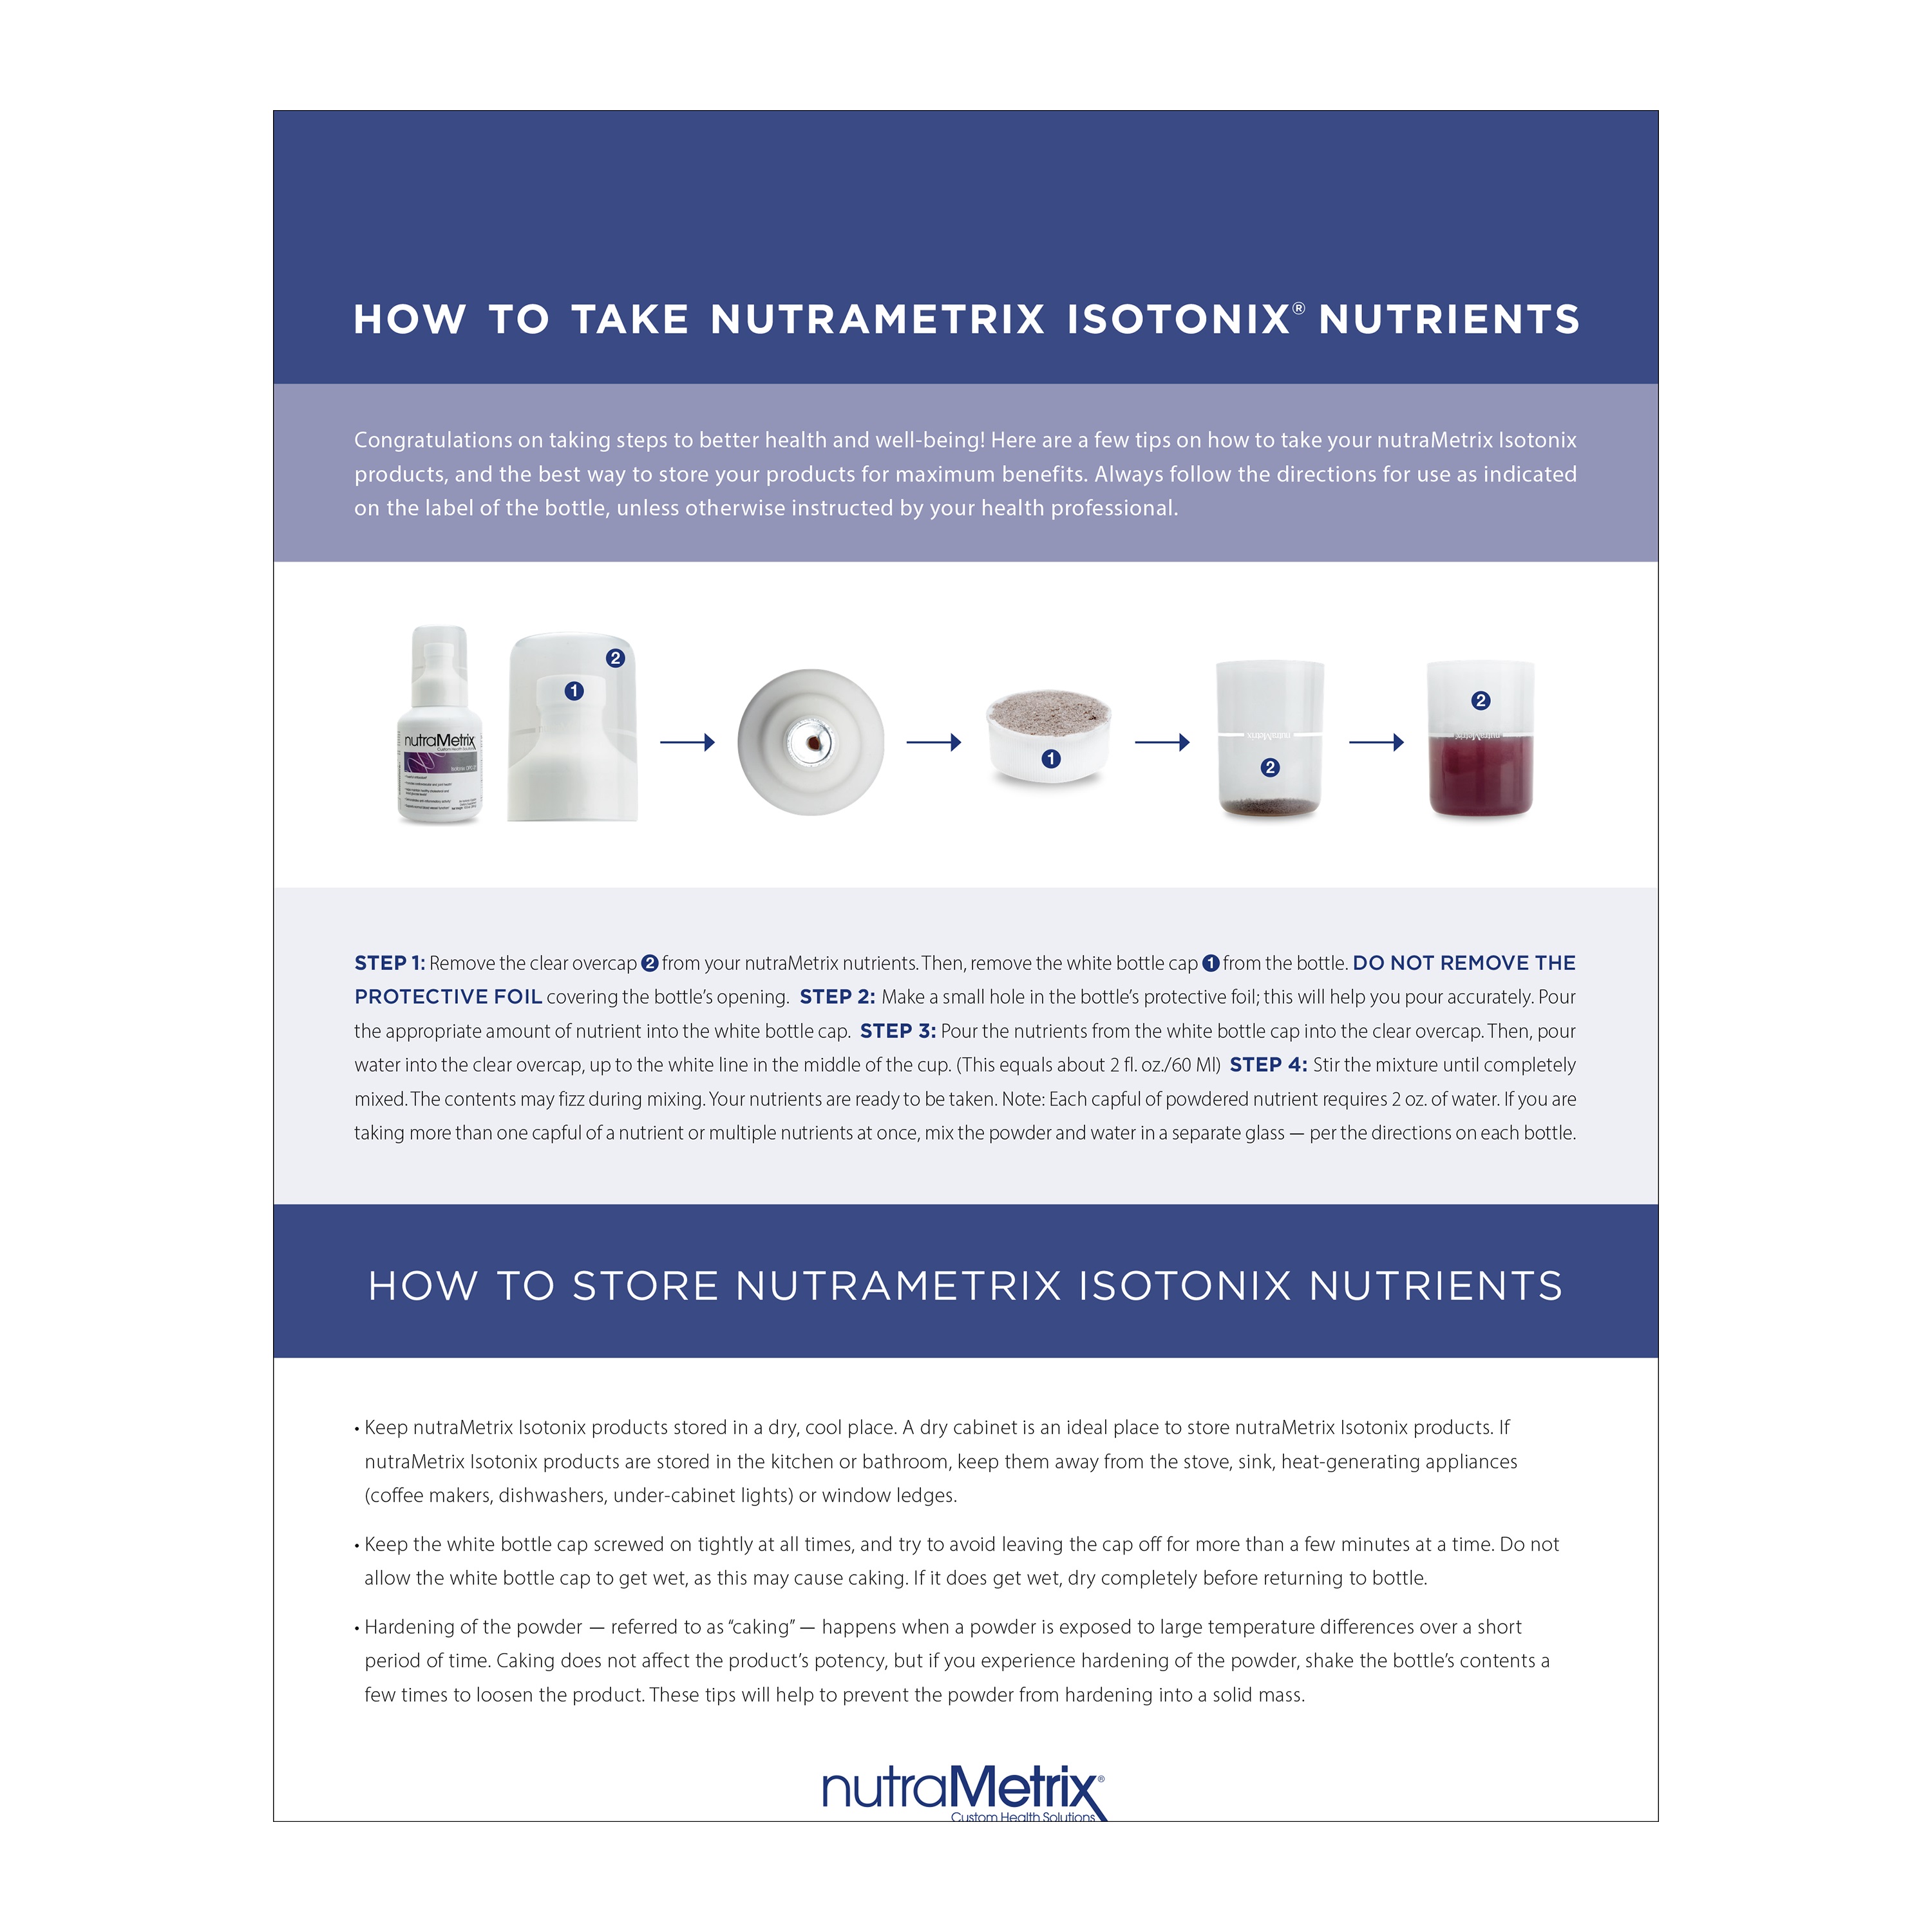 Isotonix® Delivery System  